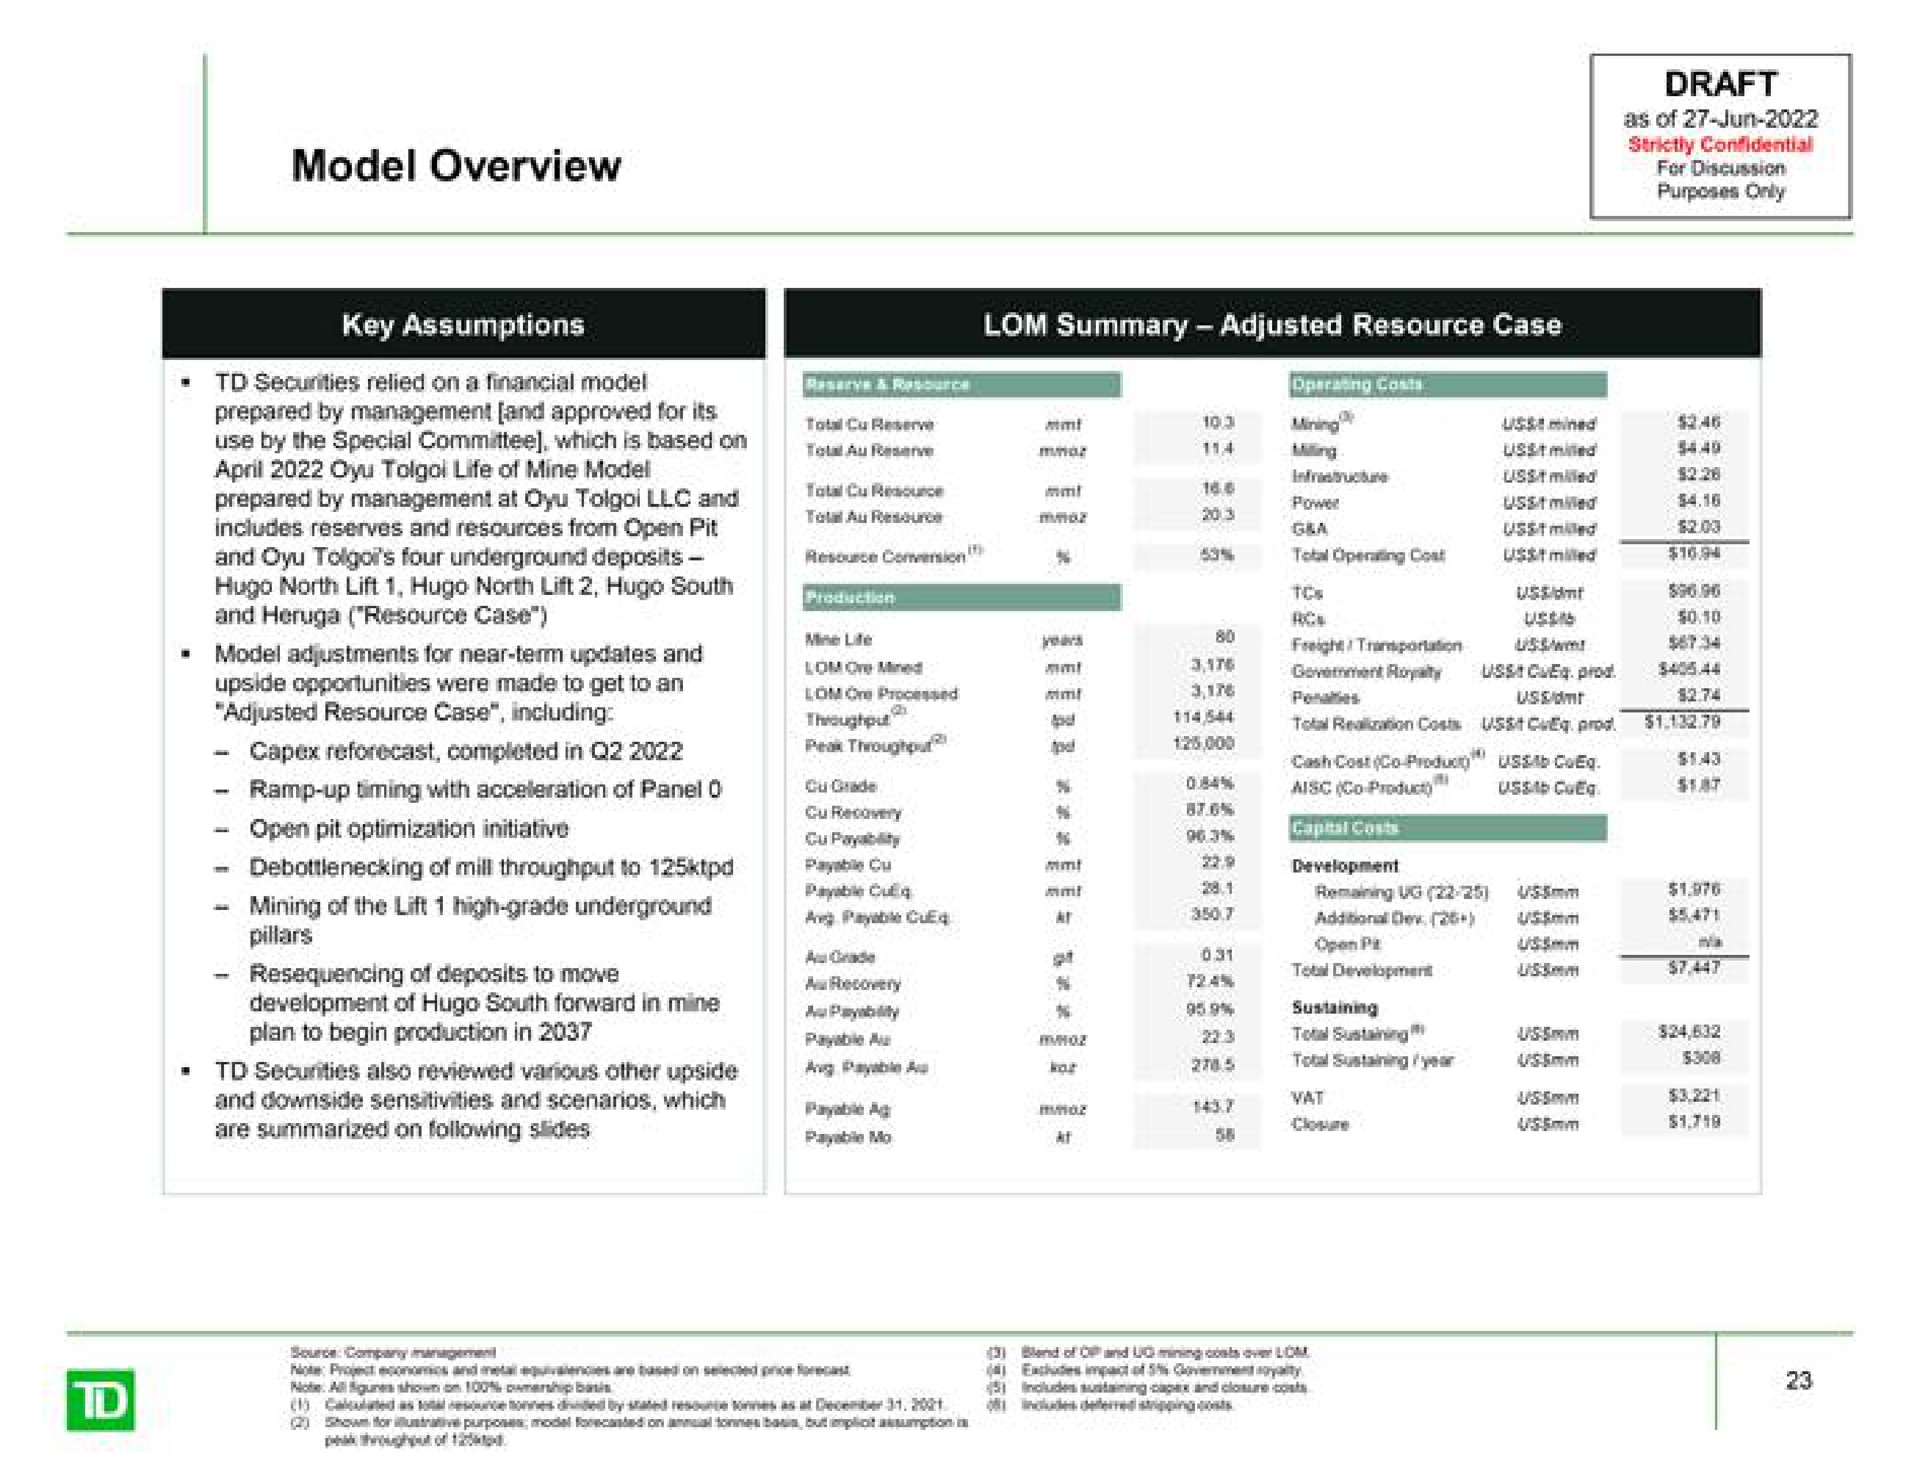 model overview draft as of discussion securities relied on a financial model open pit optimization initiative | TD Securities